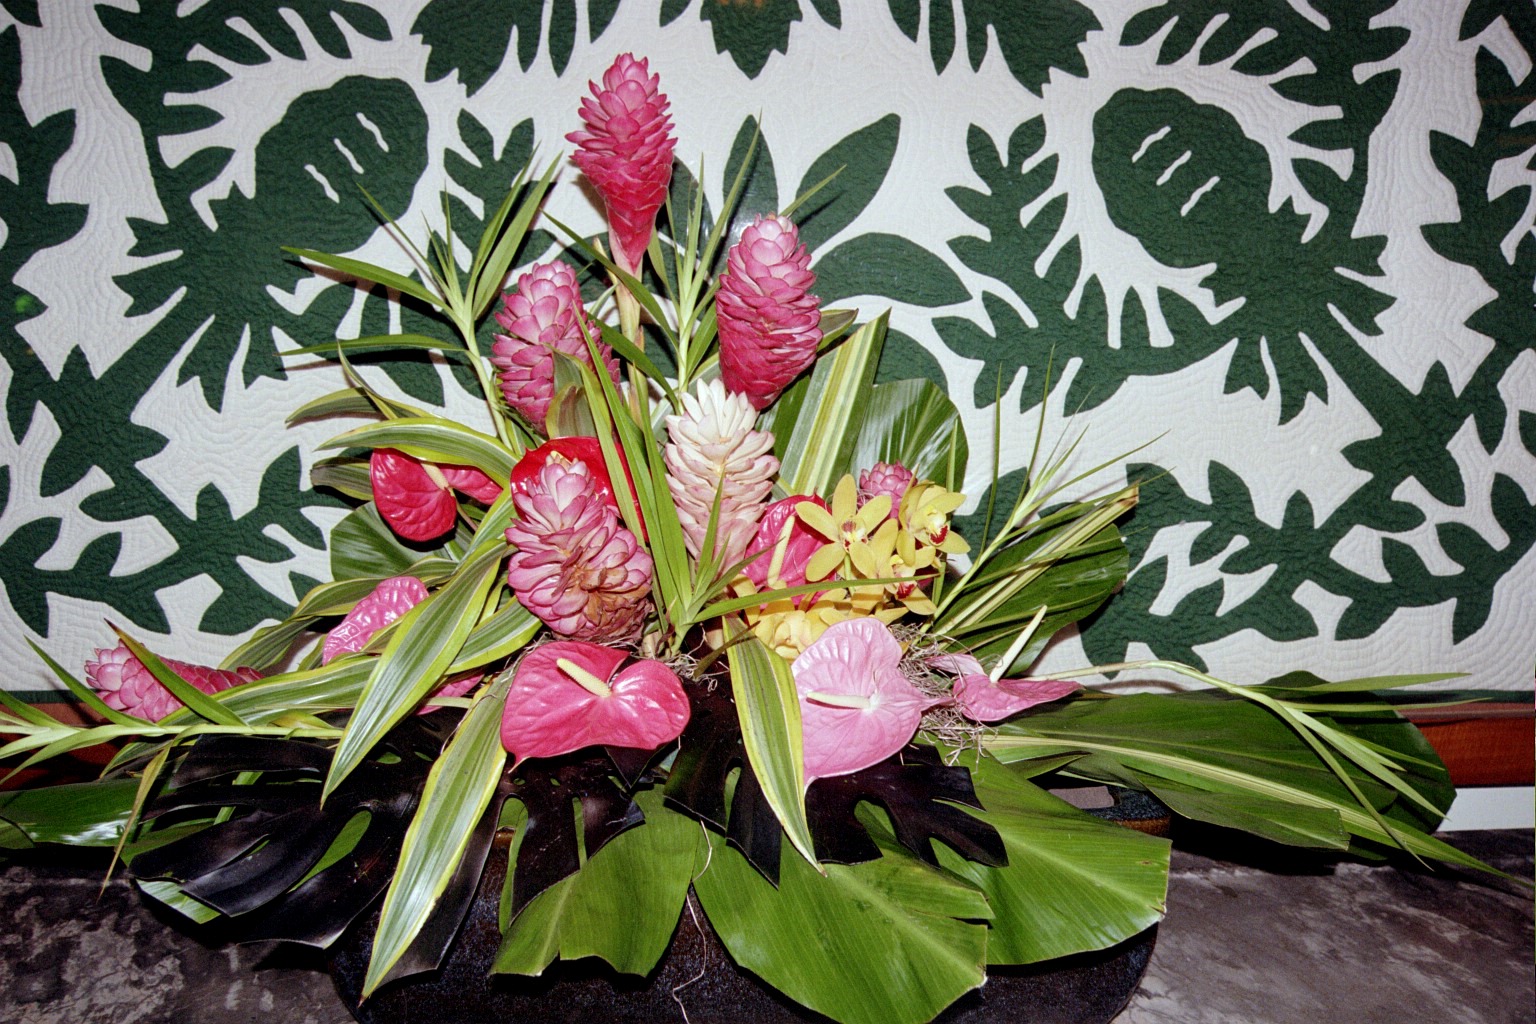 Tropical flower display and quilt -Moana Surfrider Hotel, Waikiki